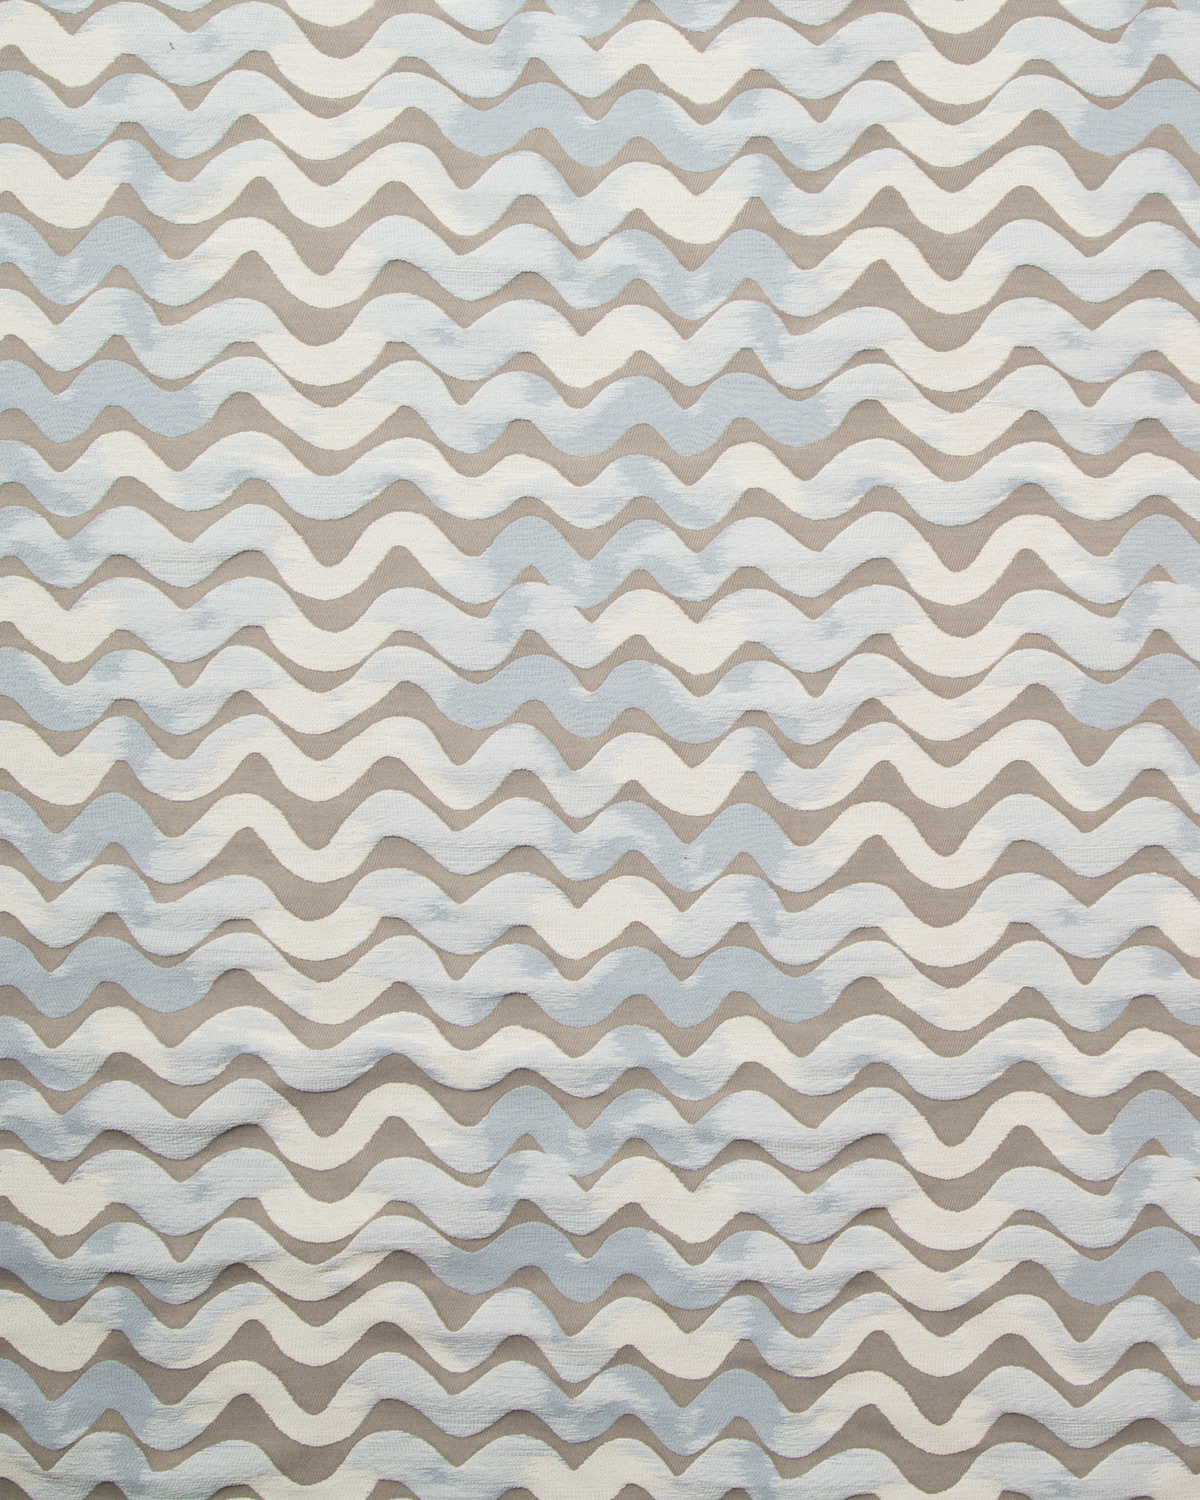 Tidal Wave Fabric in Taupe